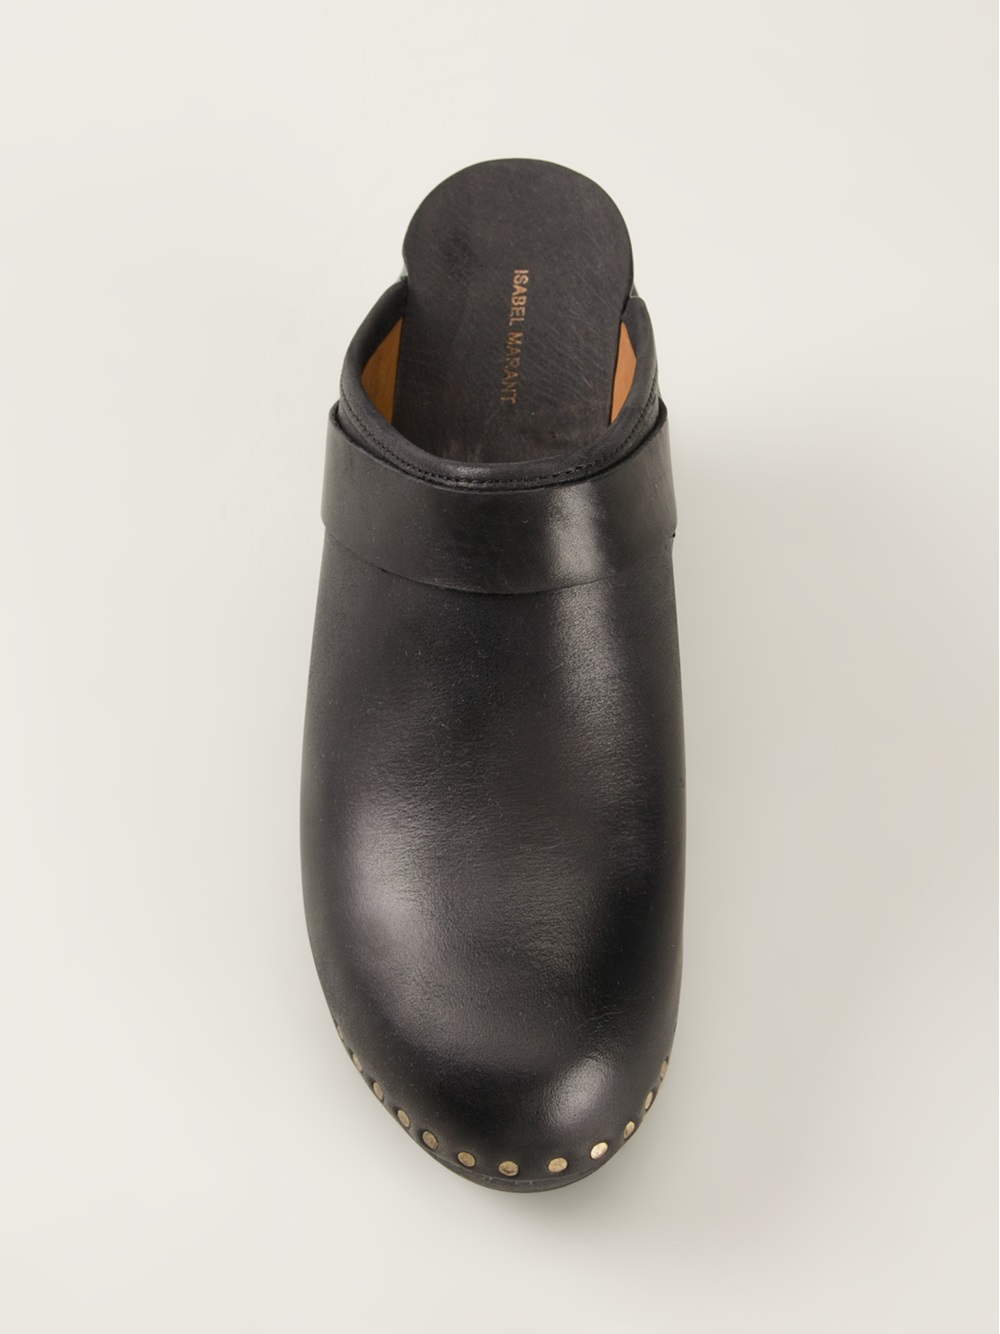 Isabel Marant Towson Clogs in Black - Lyst